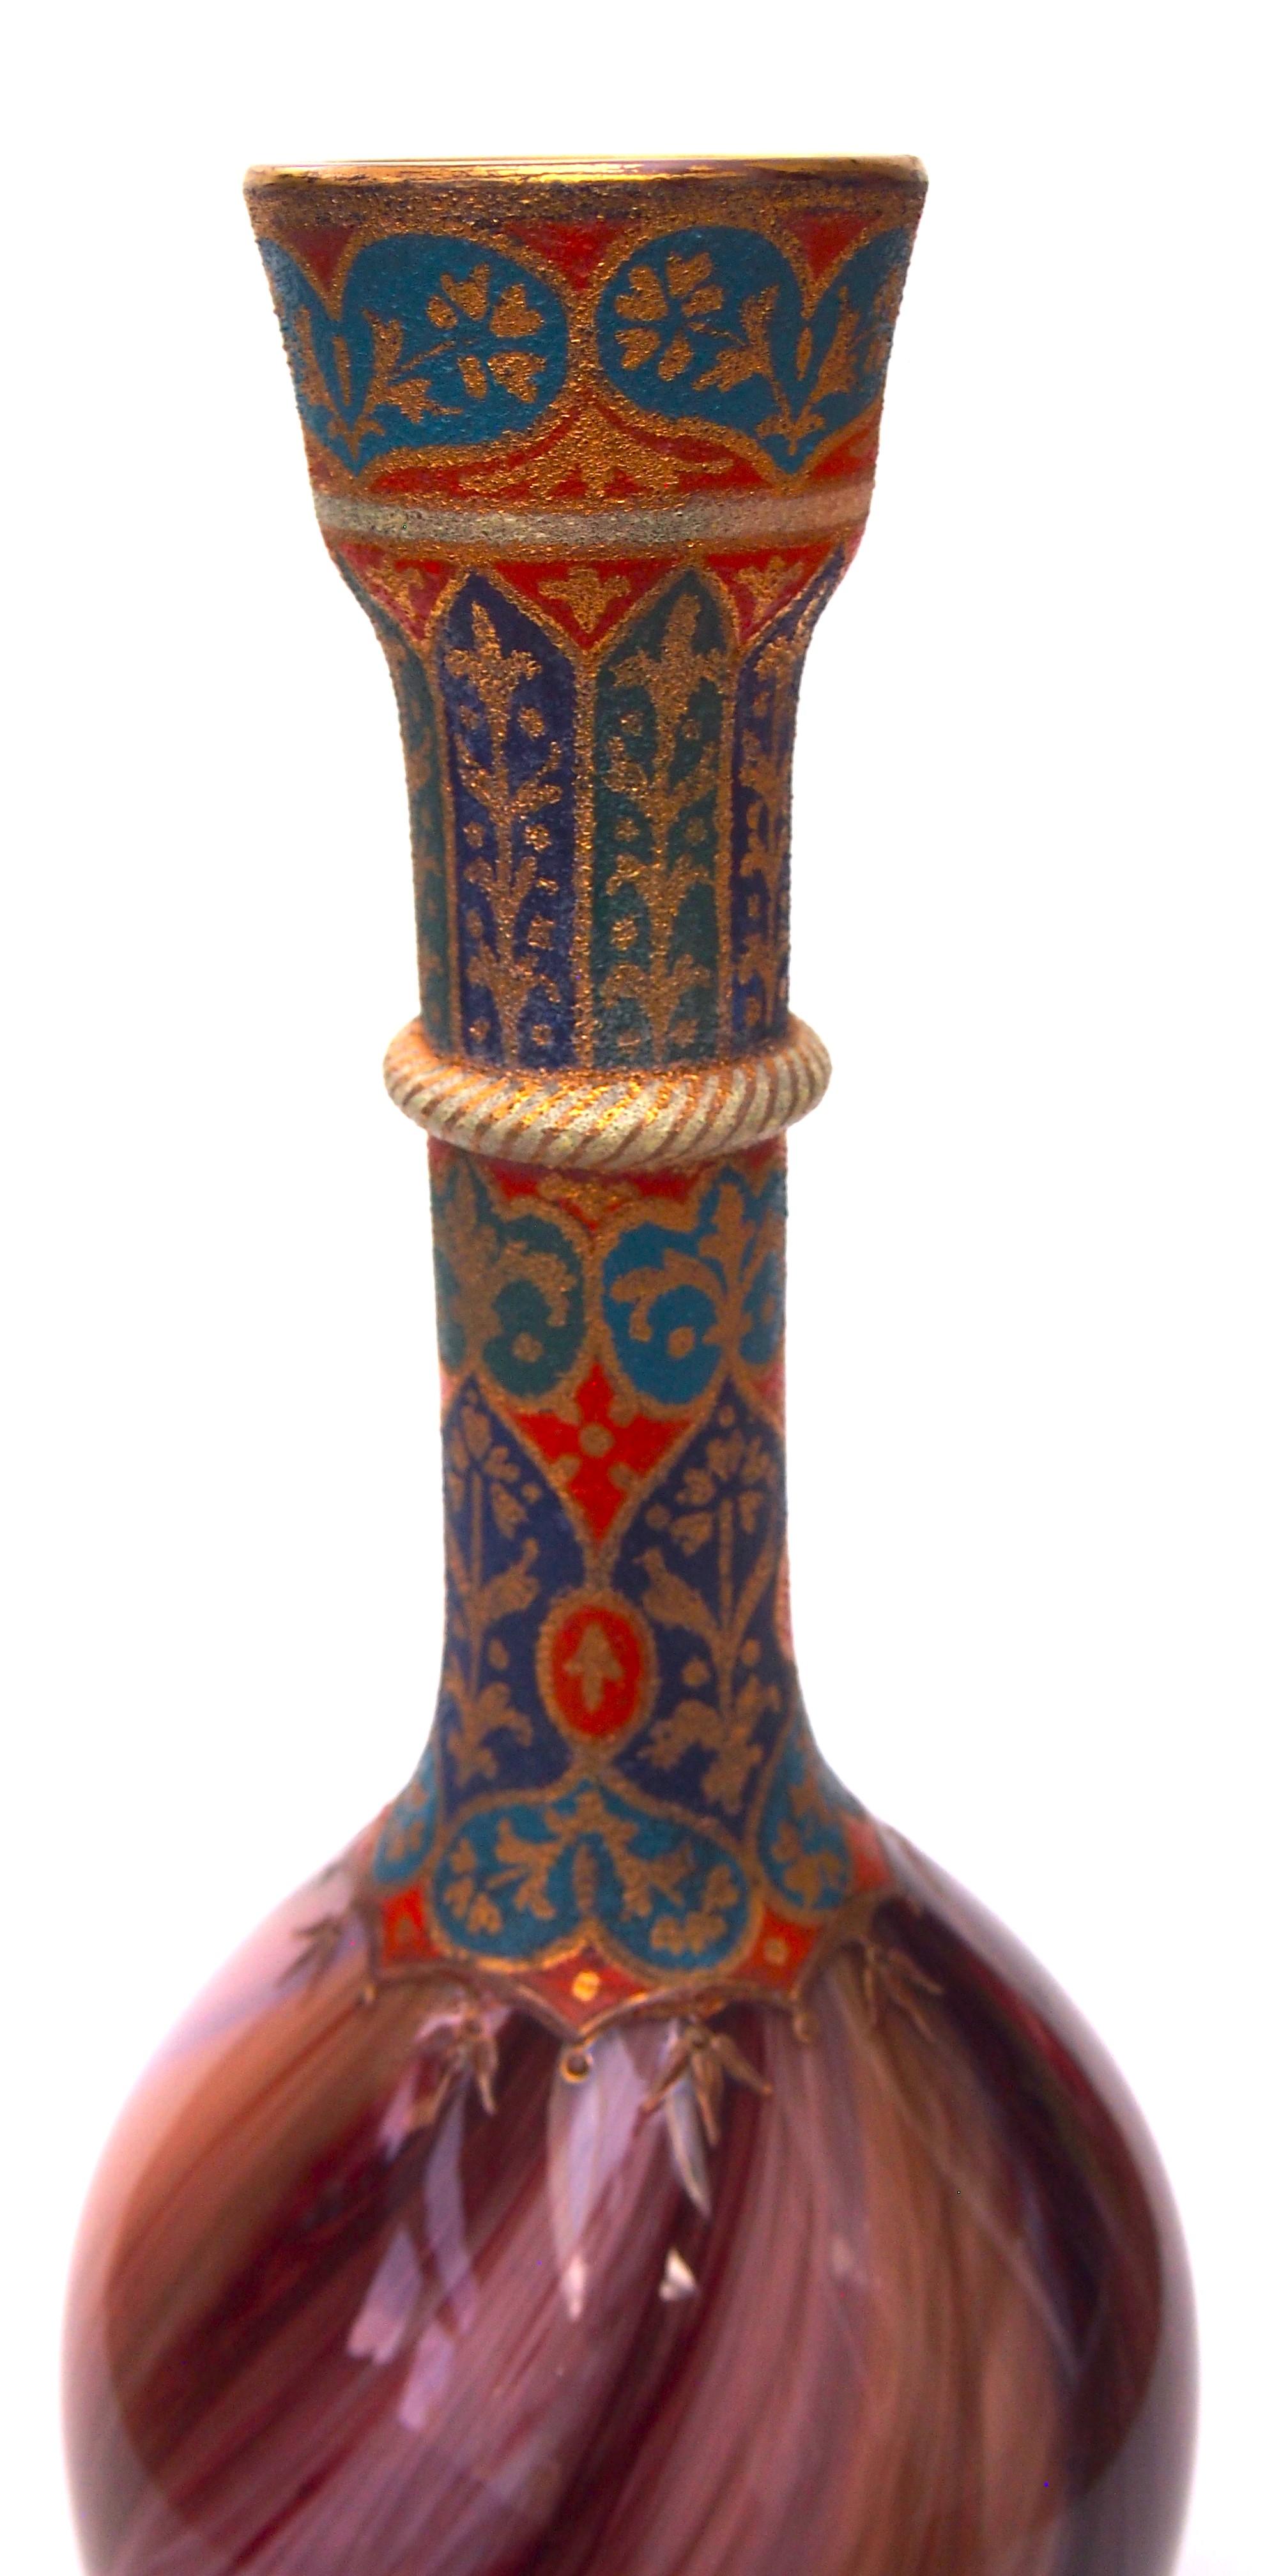 A dramatic tall early Loetz vase. Very early and imposing Loetz enamelled Onyx pattern vase, brown and red on a pink base with blue stripes and classic Islamic style enamelling down the collar and repeated around the base. Probably made for the